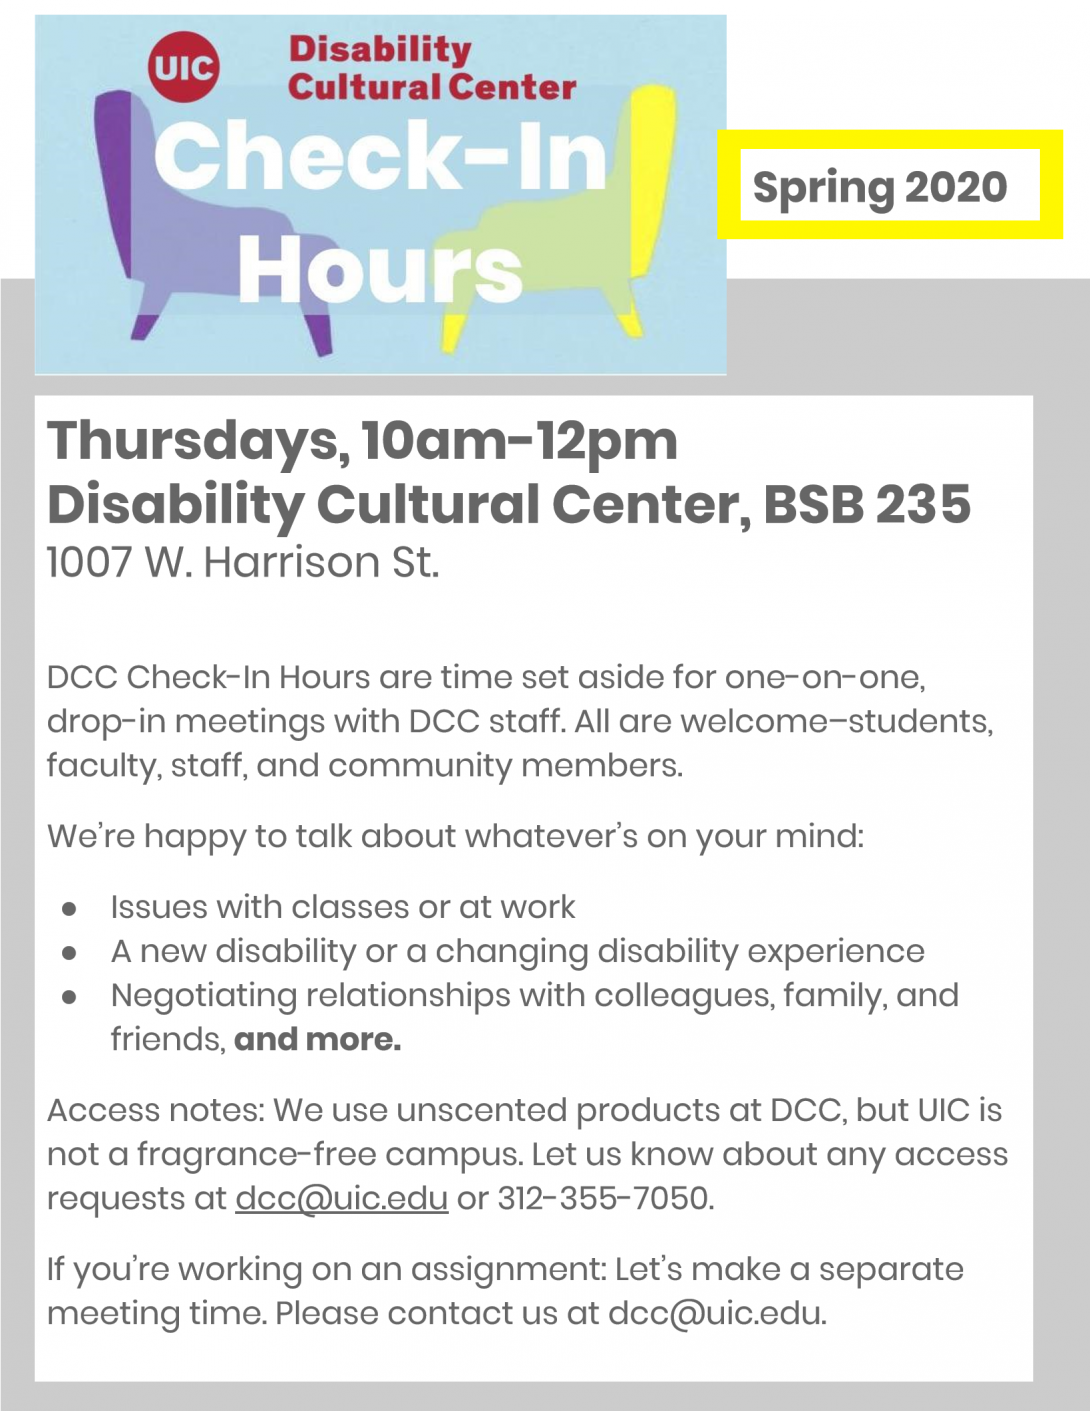 In the top left corner of the flyer, there is a logo for the DCC Check-In Hours, which is a light blue box with a purple and yellow chair facing each other, with the text, 